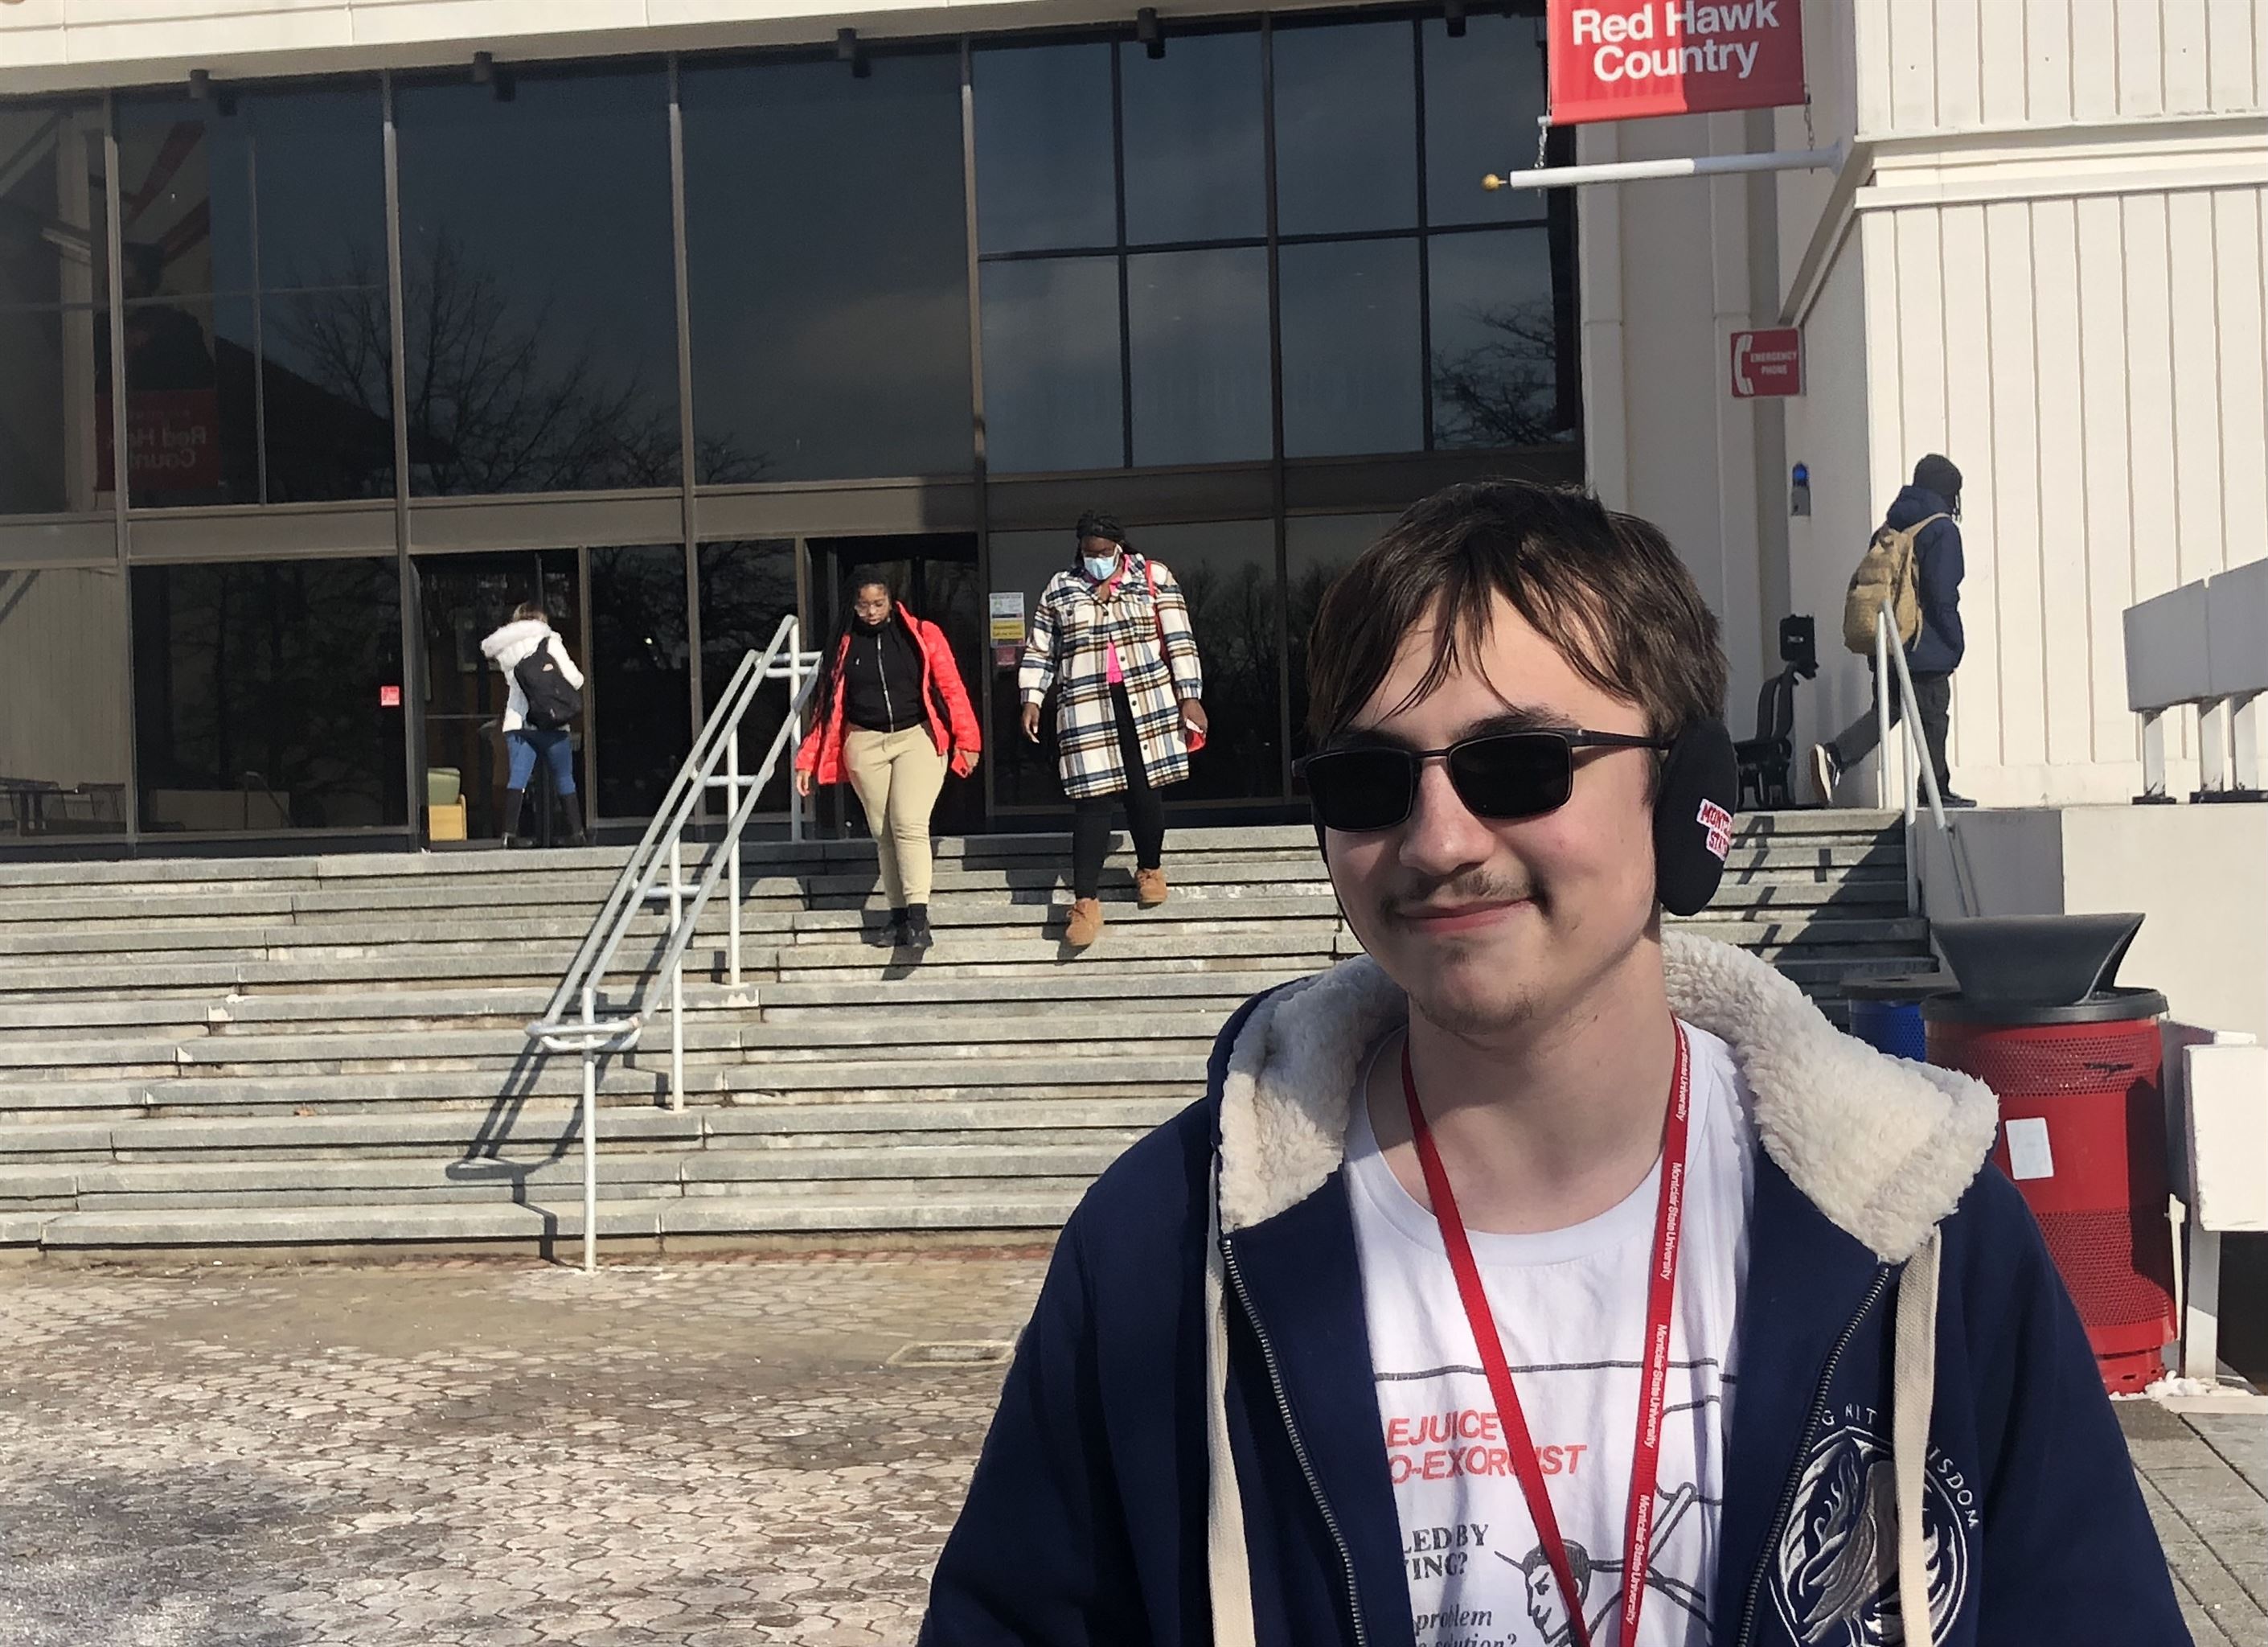 Kristopher Skotek said his classes are at full capacity and not socially distant. Jenna Sundel | The Montclarion